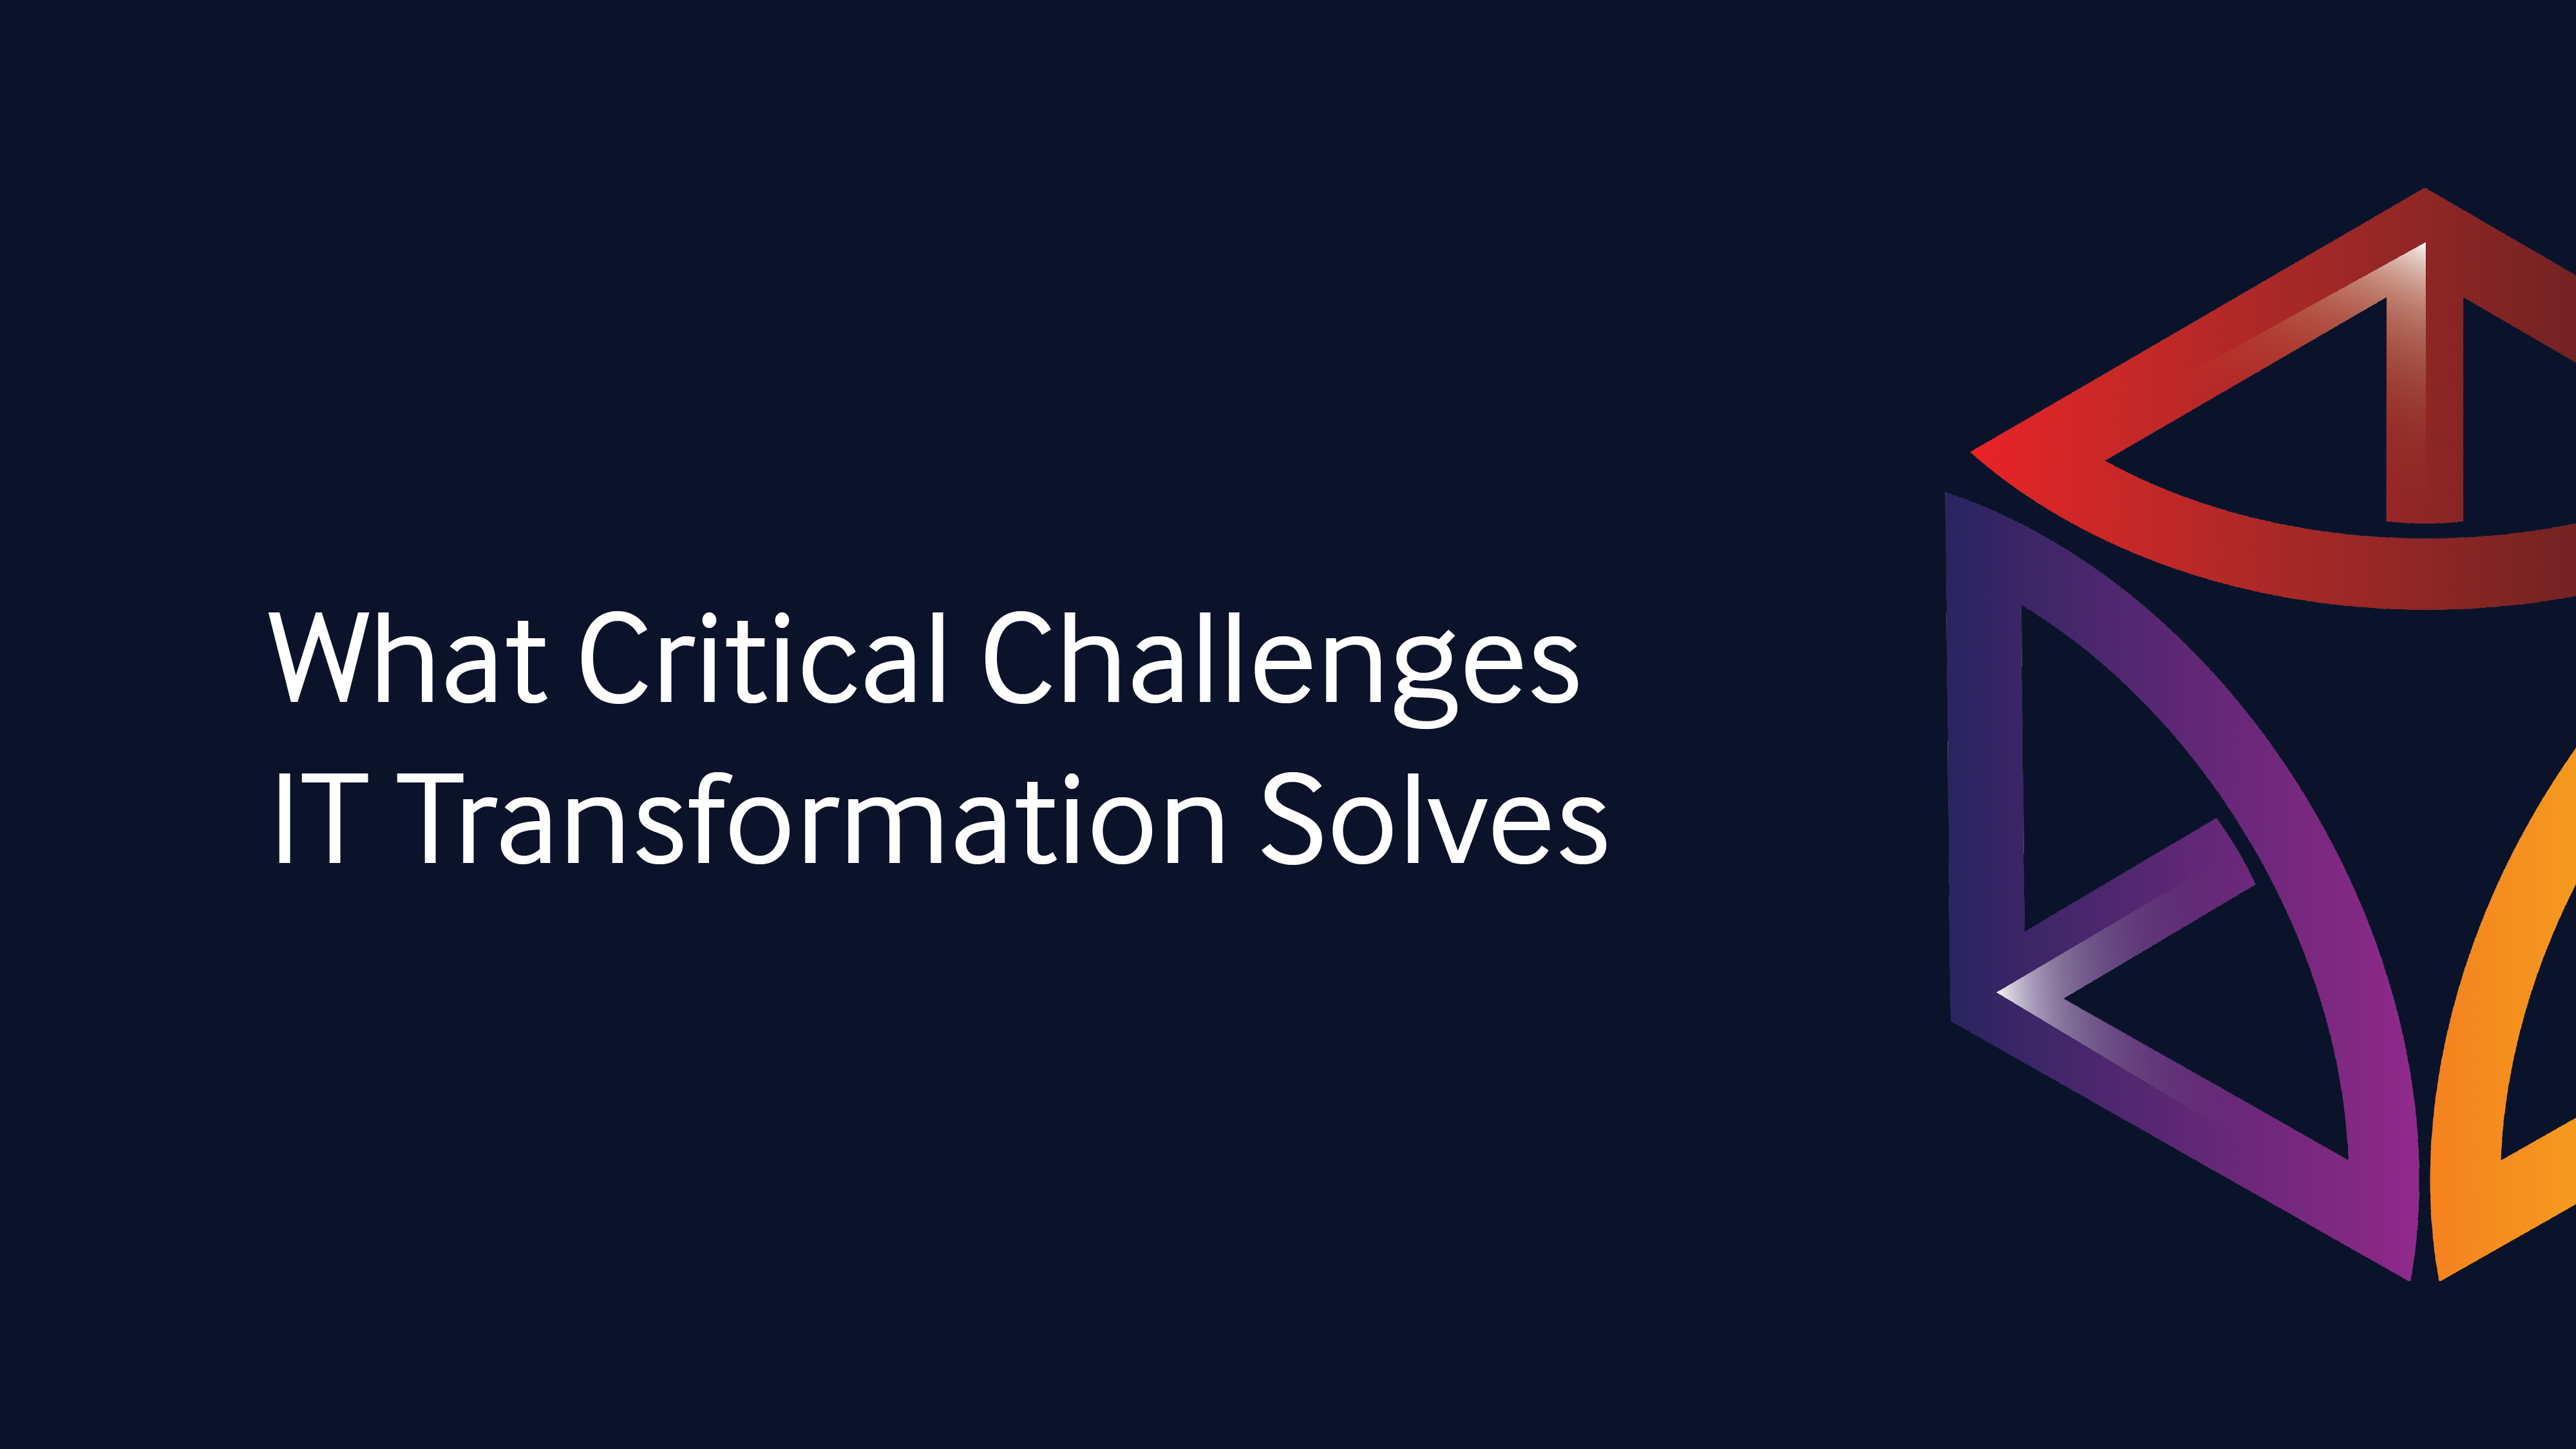 What Critical Challenges IT Transformation Solves